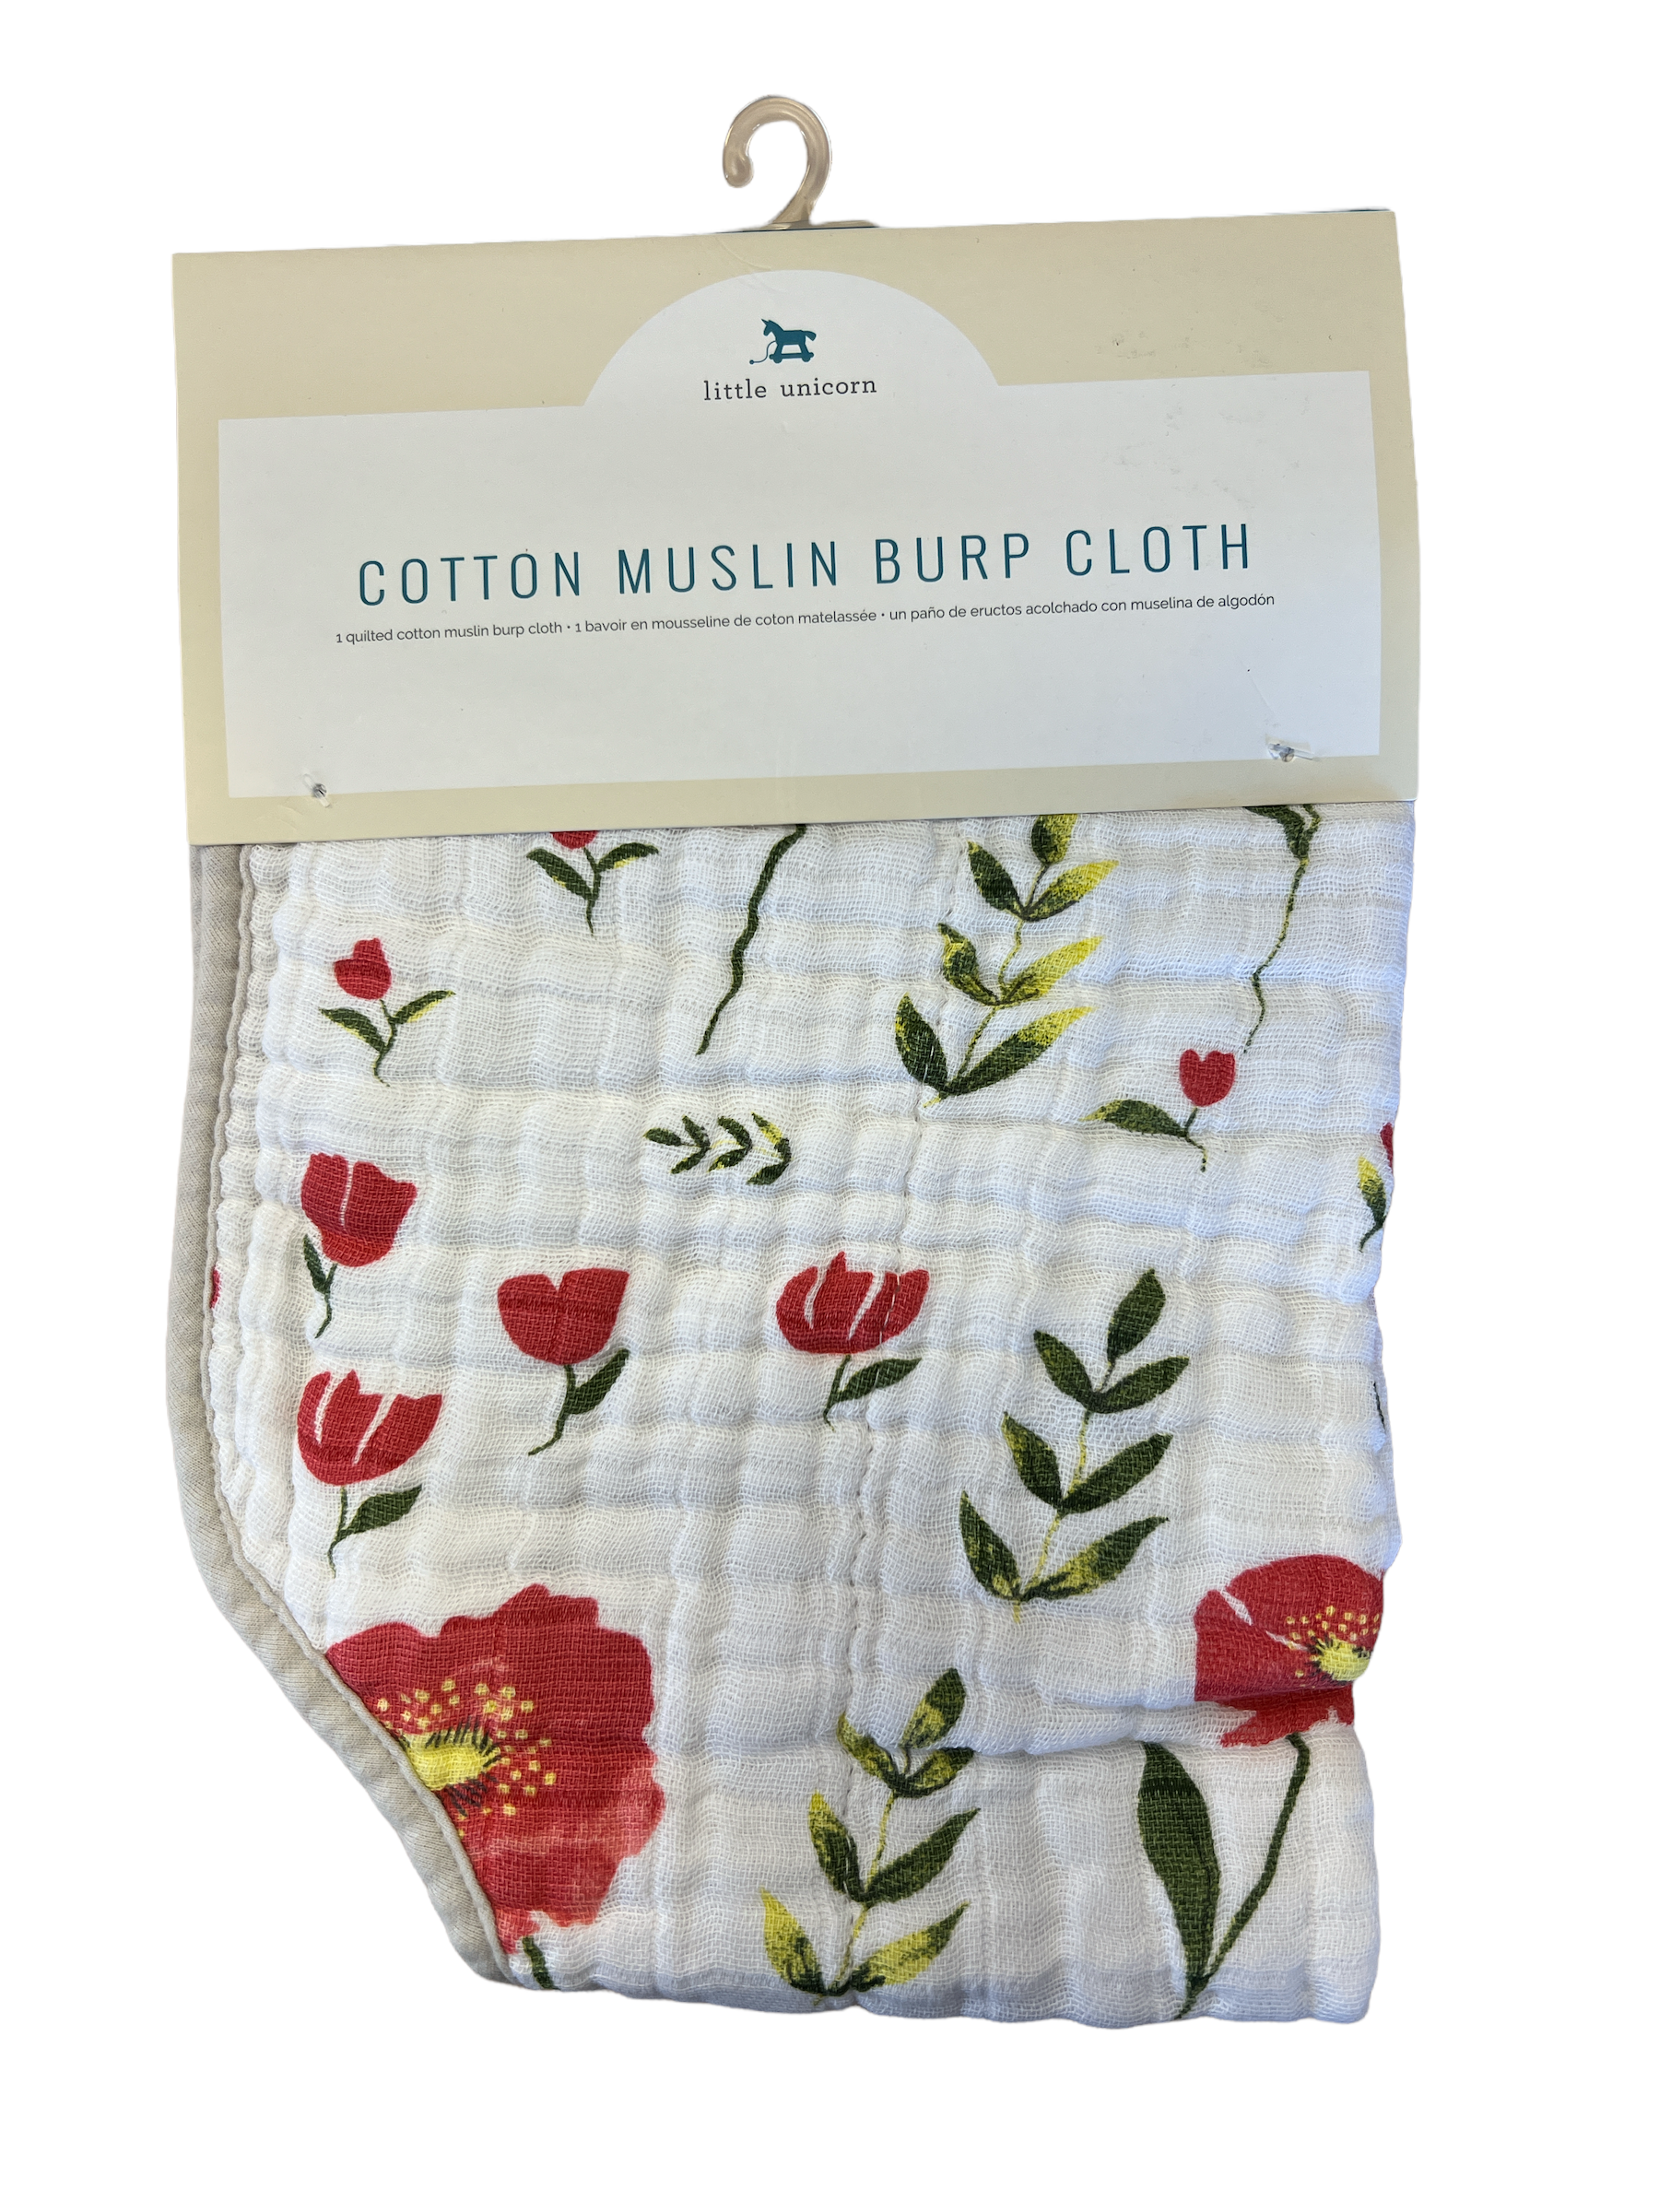 Cotton Muslin Burp Cloth - Summer Poppy-520 Baby & Kids Gifts-Simply Stylish Boutique-Simply Stylish Boutique | Women’s & Kid’s Fashion | Paducah, KY